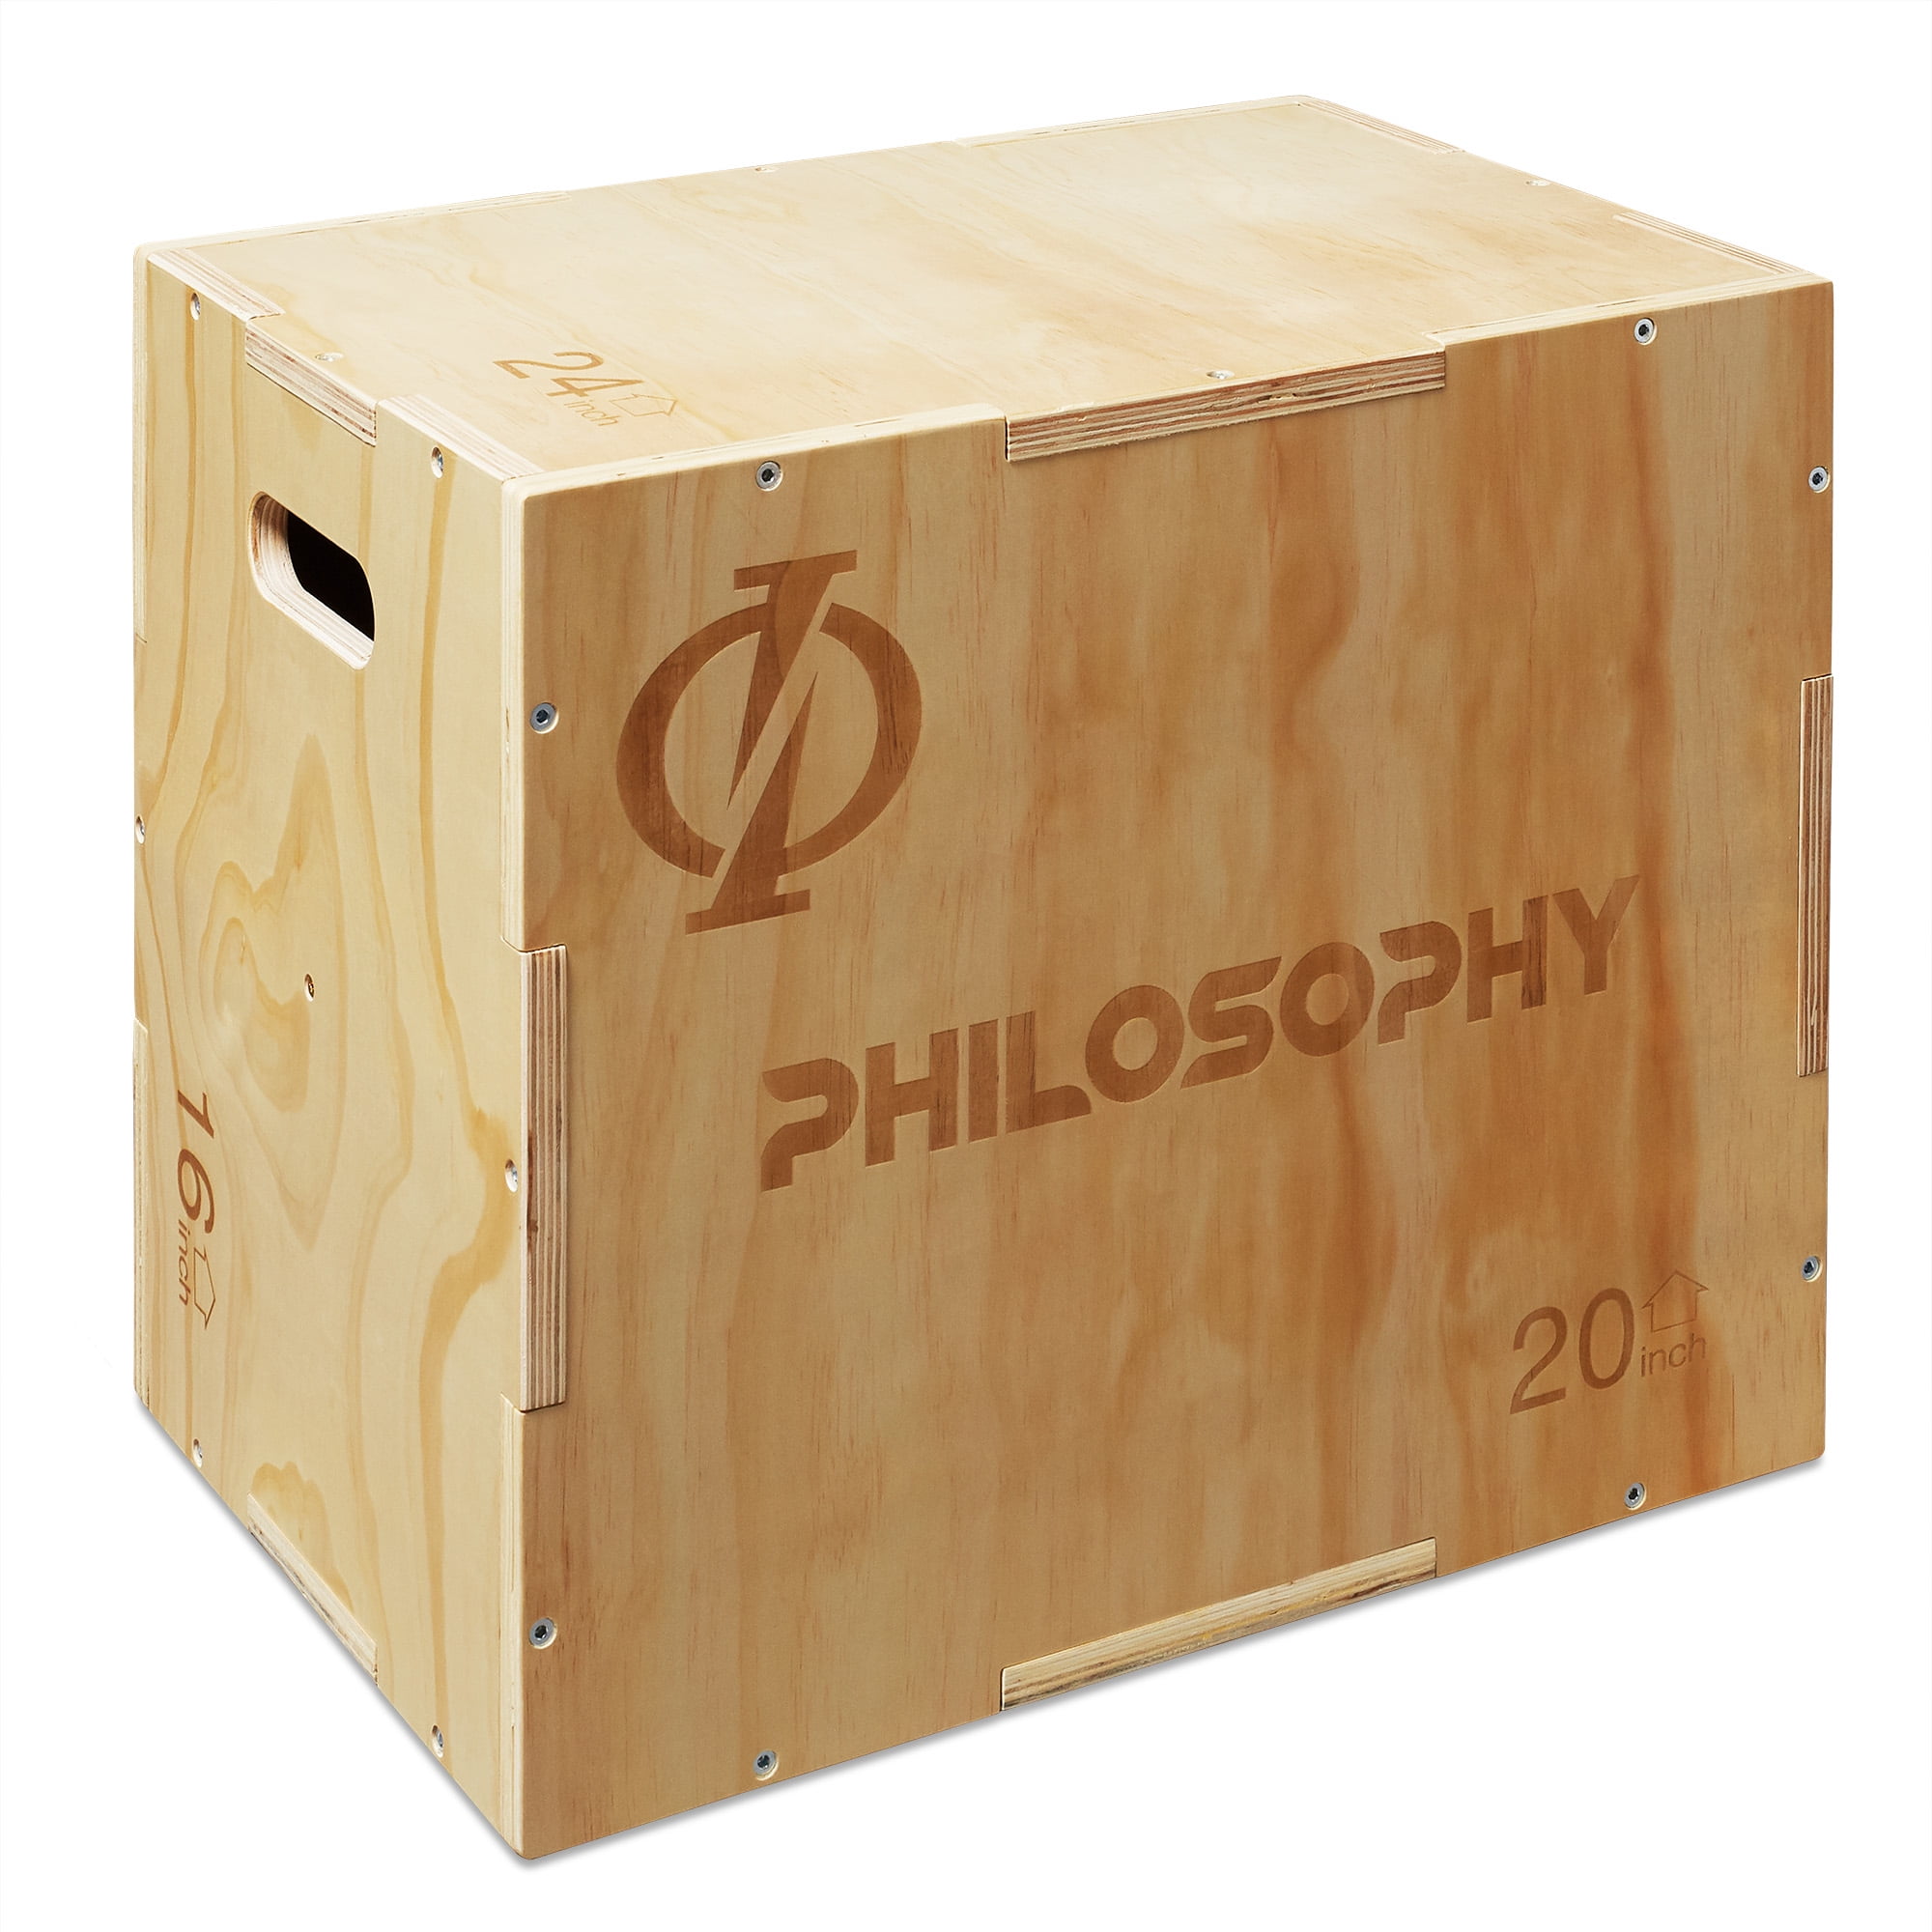 Philosophy Gym 3 in 1 Soft Foam Plyometric Box Jumping Plyo Box for Training and Conditioning 